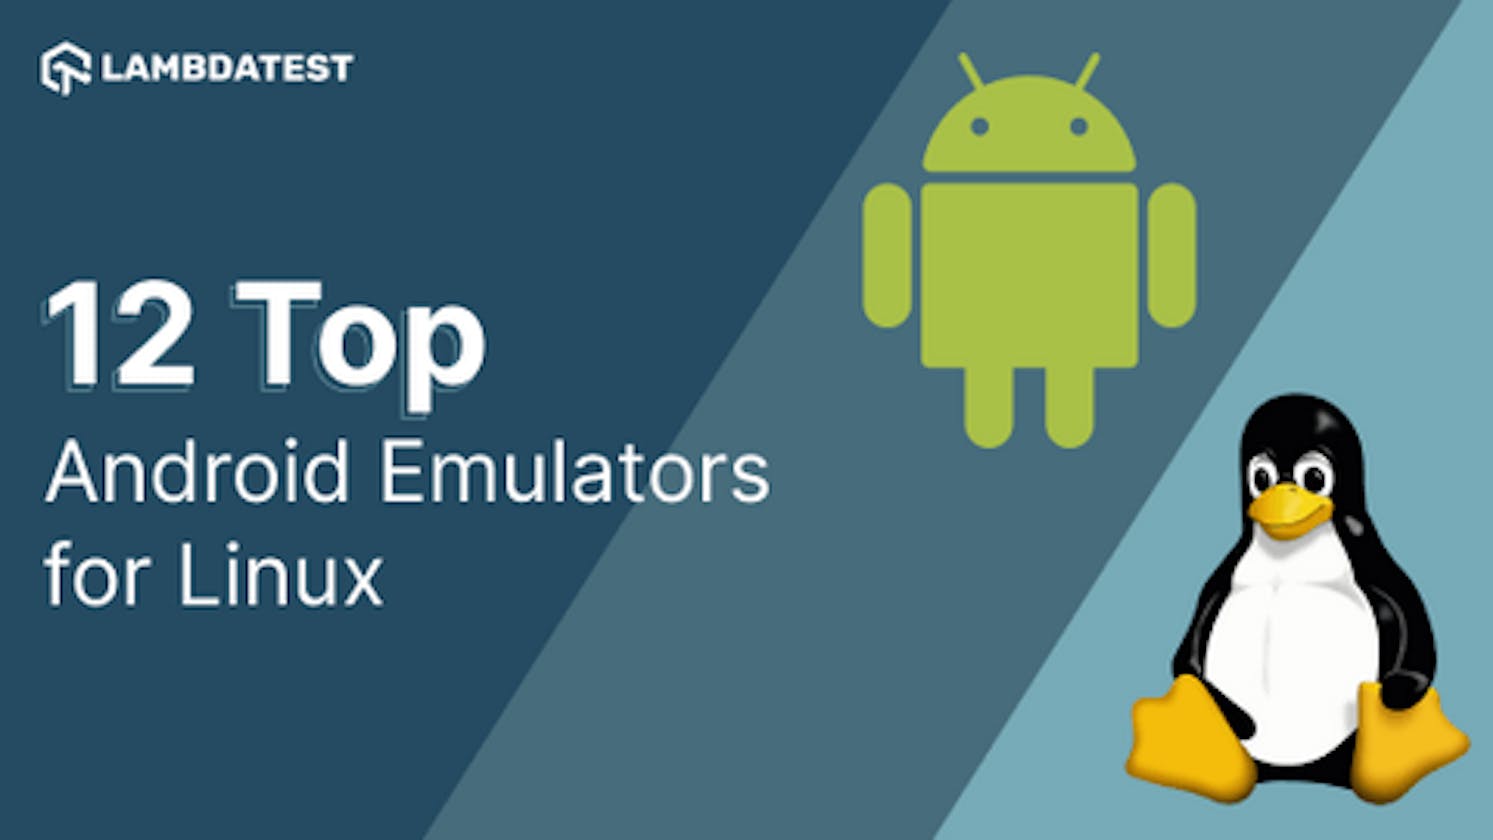 12 Top Android Emulators for Linux